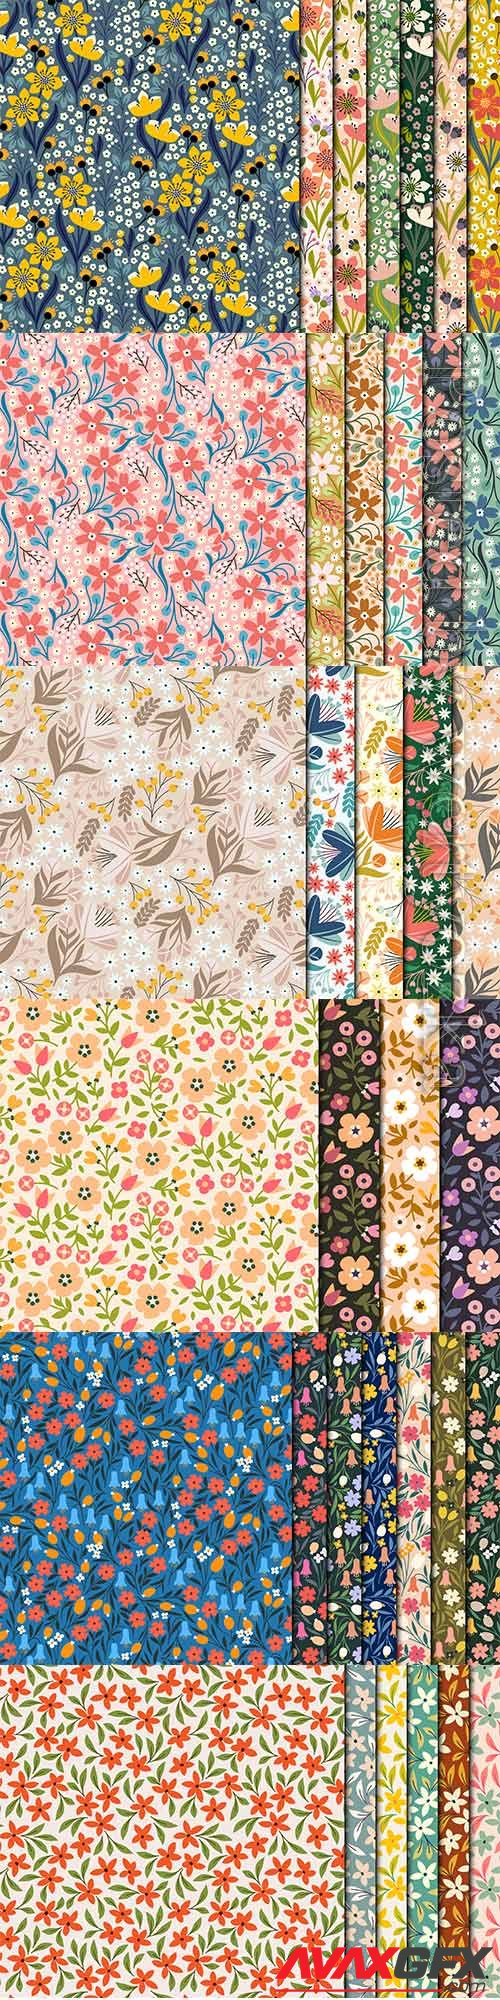 Vintage small flowers seamless pattern